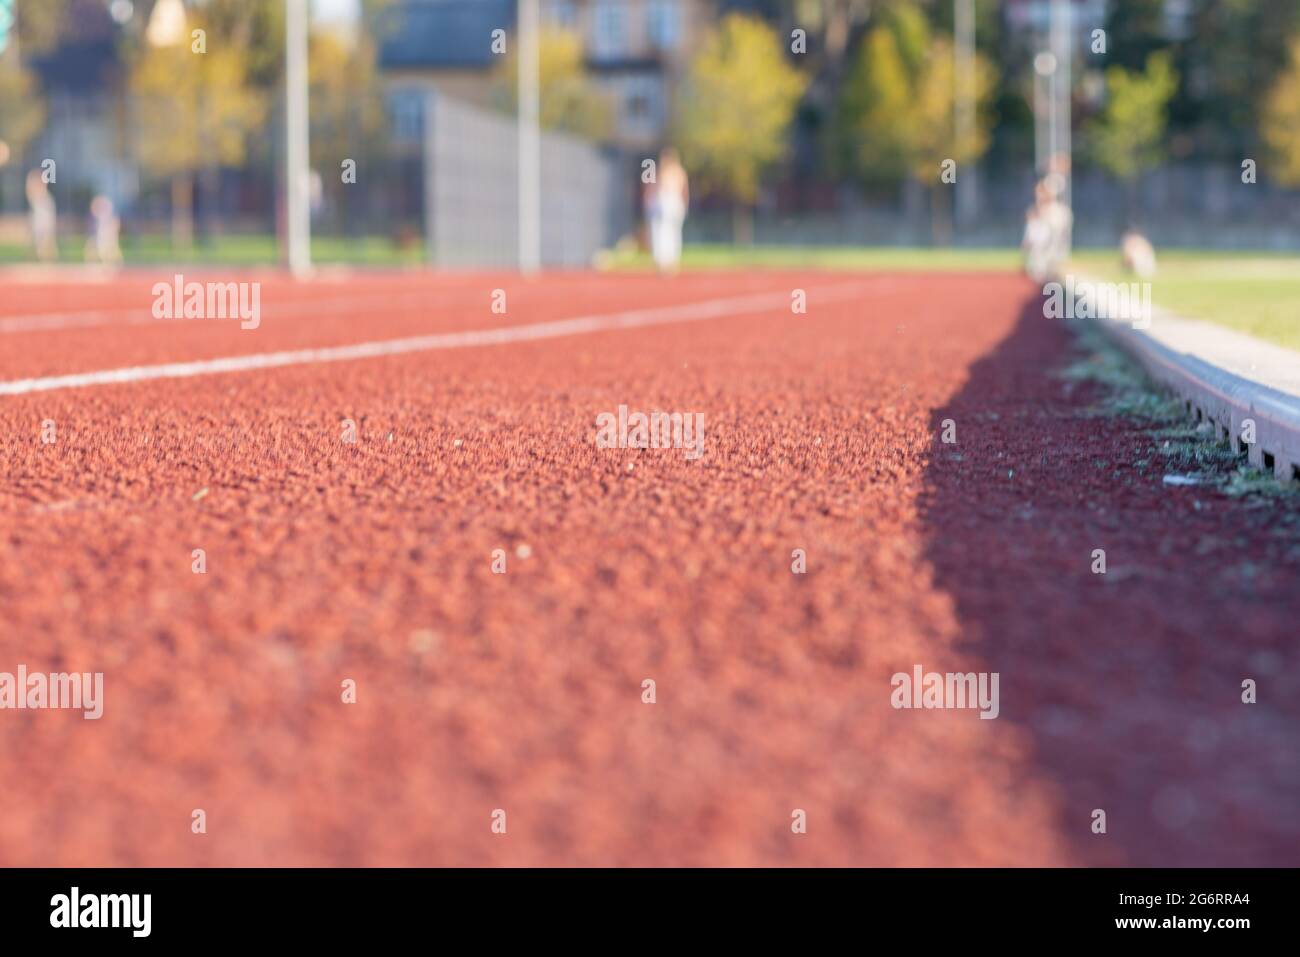 Red plastic track in the outdoor track and field stadium.Closeup. Stock Photo